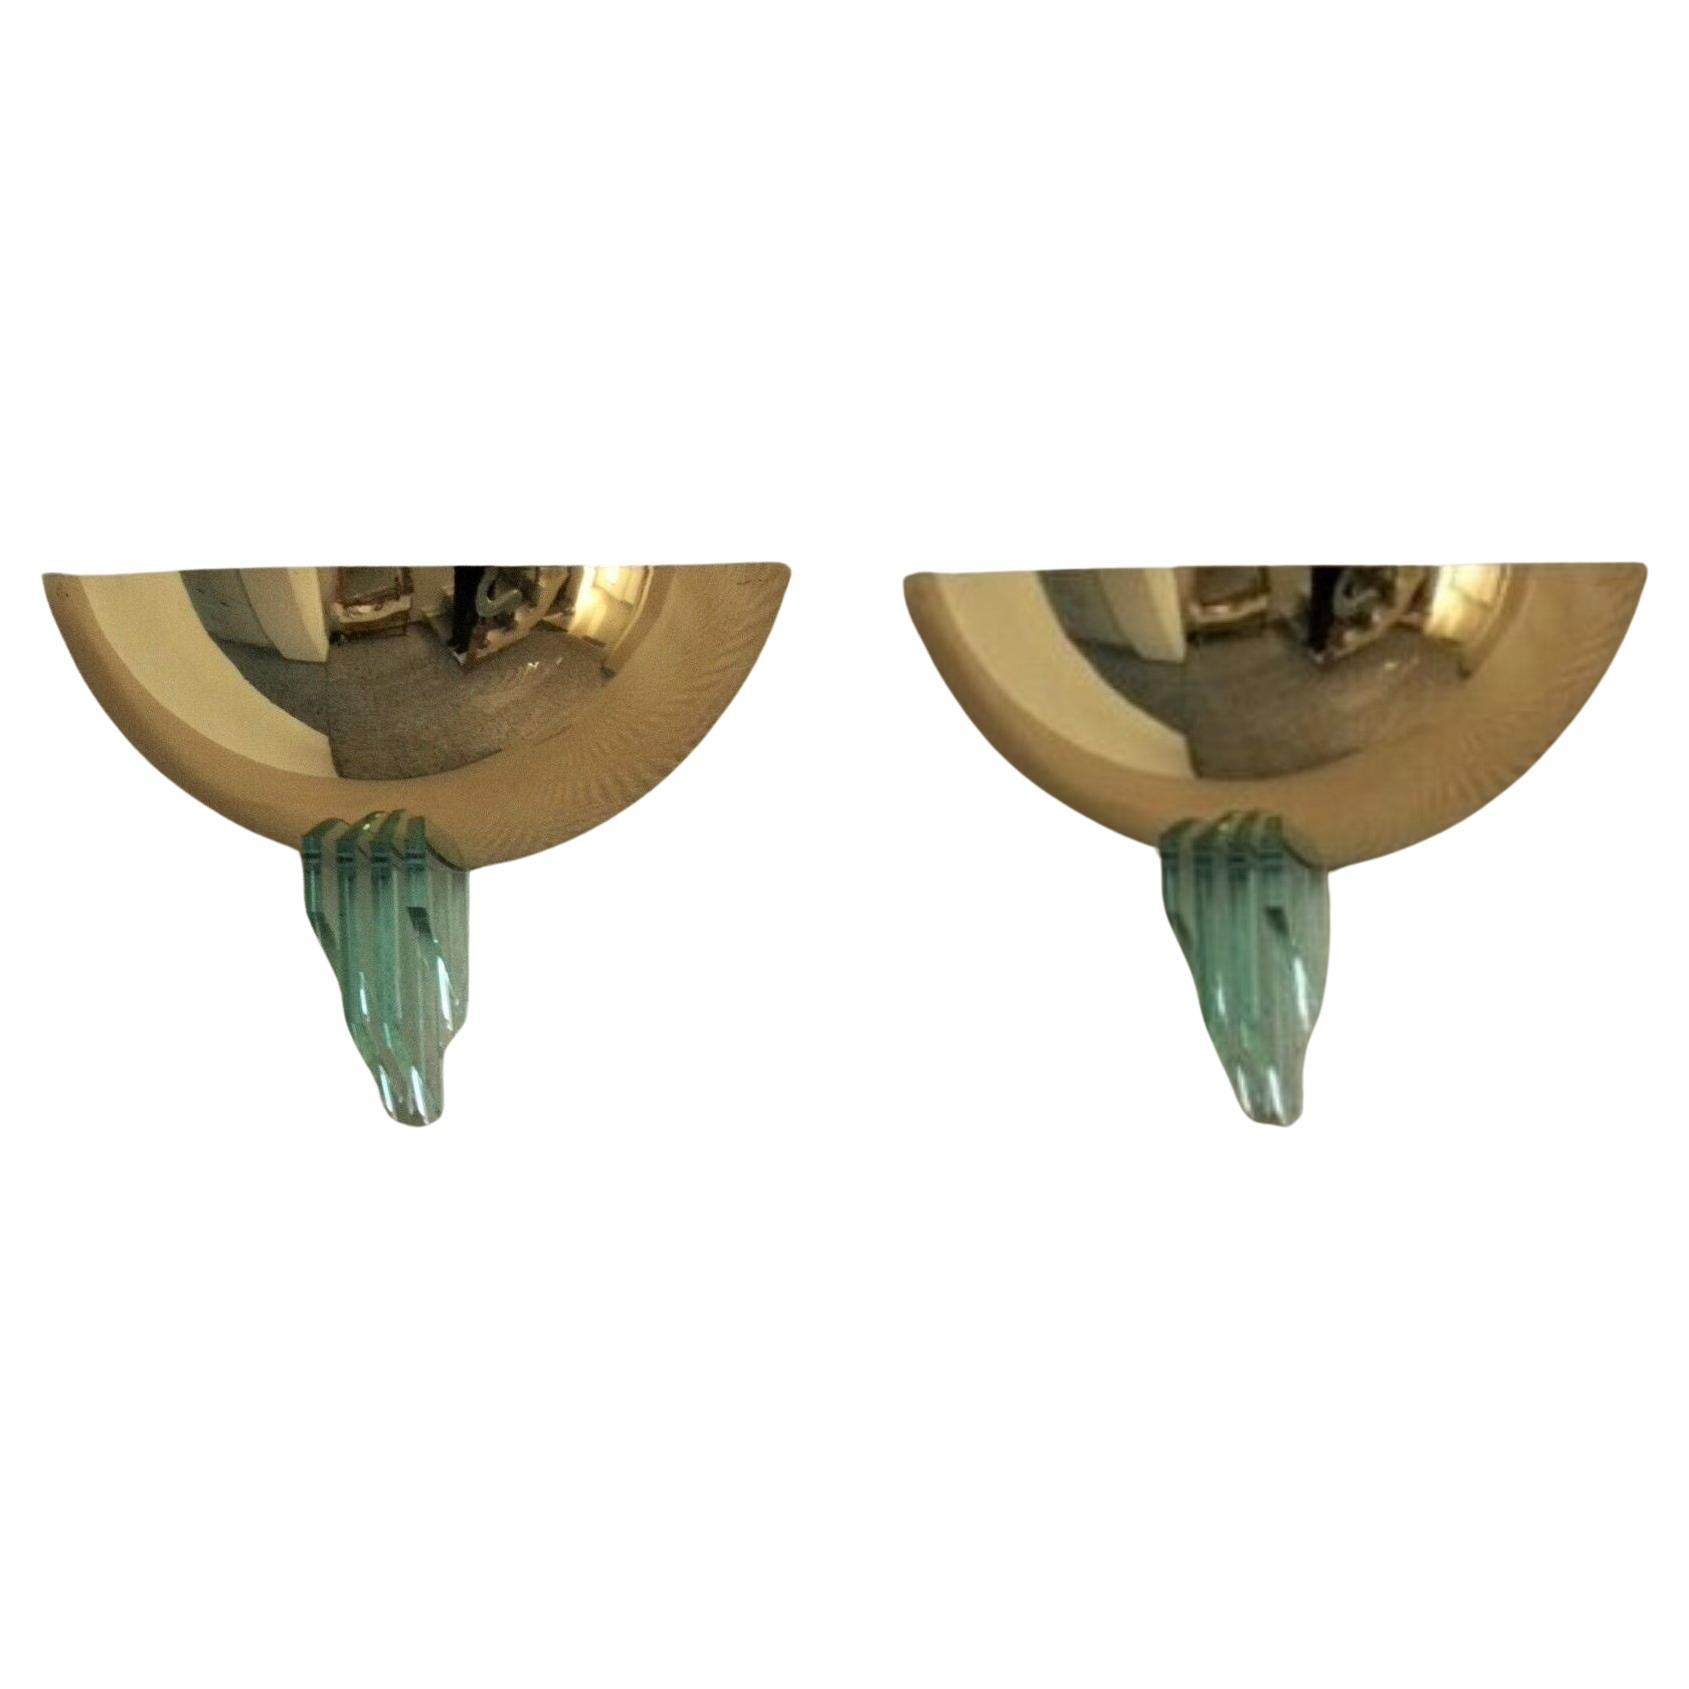 A Pair of brass and Murano glass wall lights in the Fontana Arte style, Italy, 1960s. Demi-cup shape decorate with four geometric profiles in thick polished glass on the base. Each sconce takes a E27 60watt screw bulb creating a warm, pleasant light